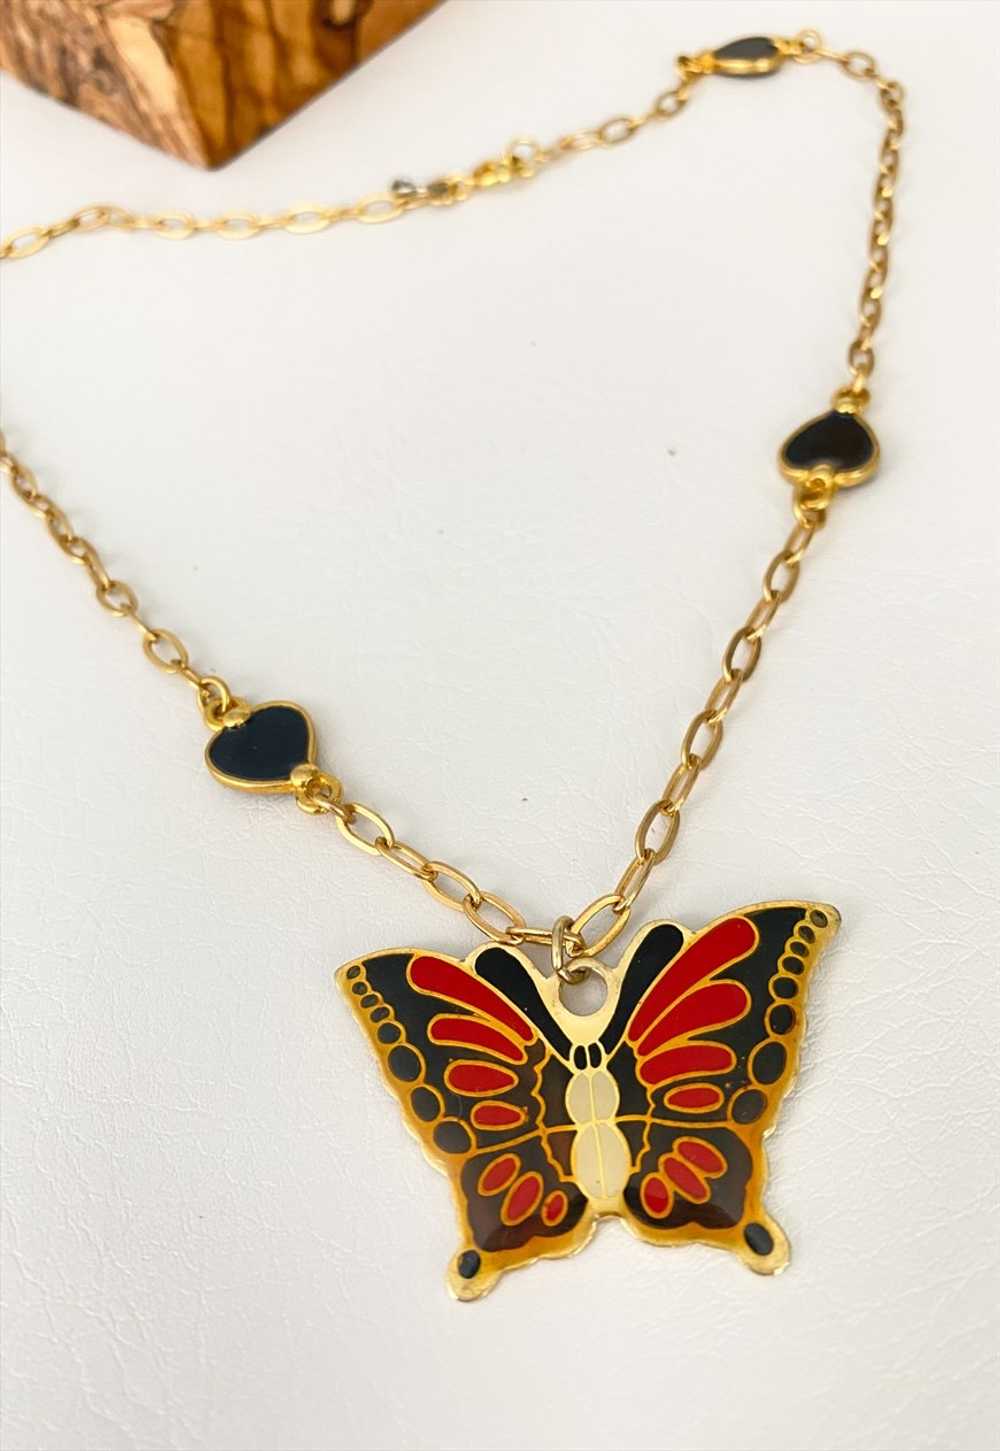 Boho Rose 1980's Heart Chain Butterfly Necklace - image 3